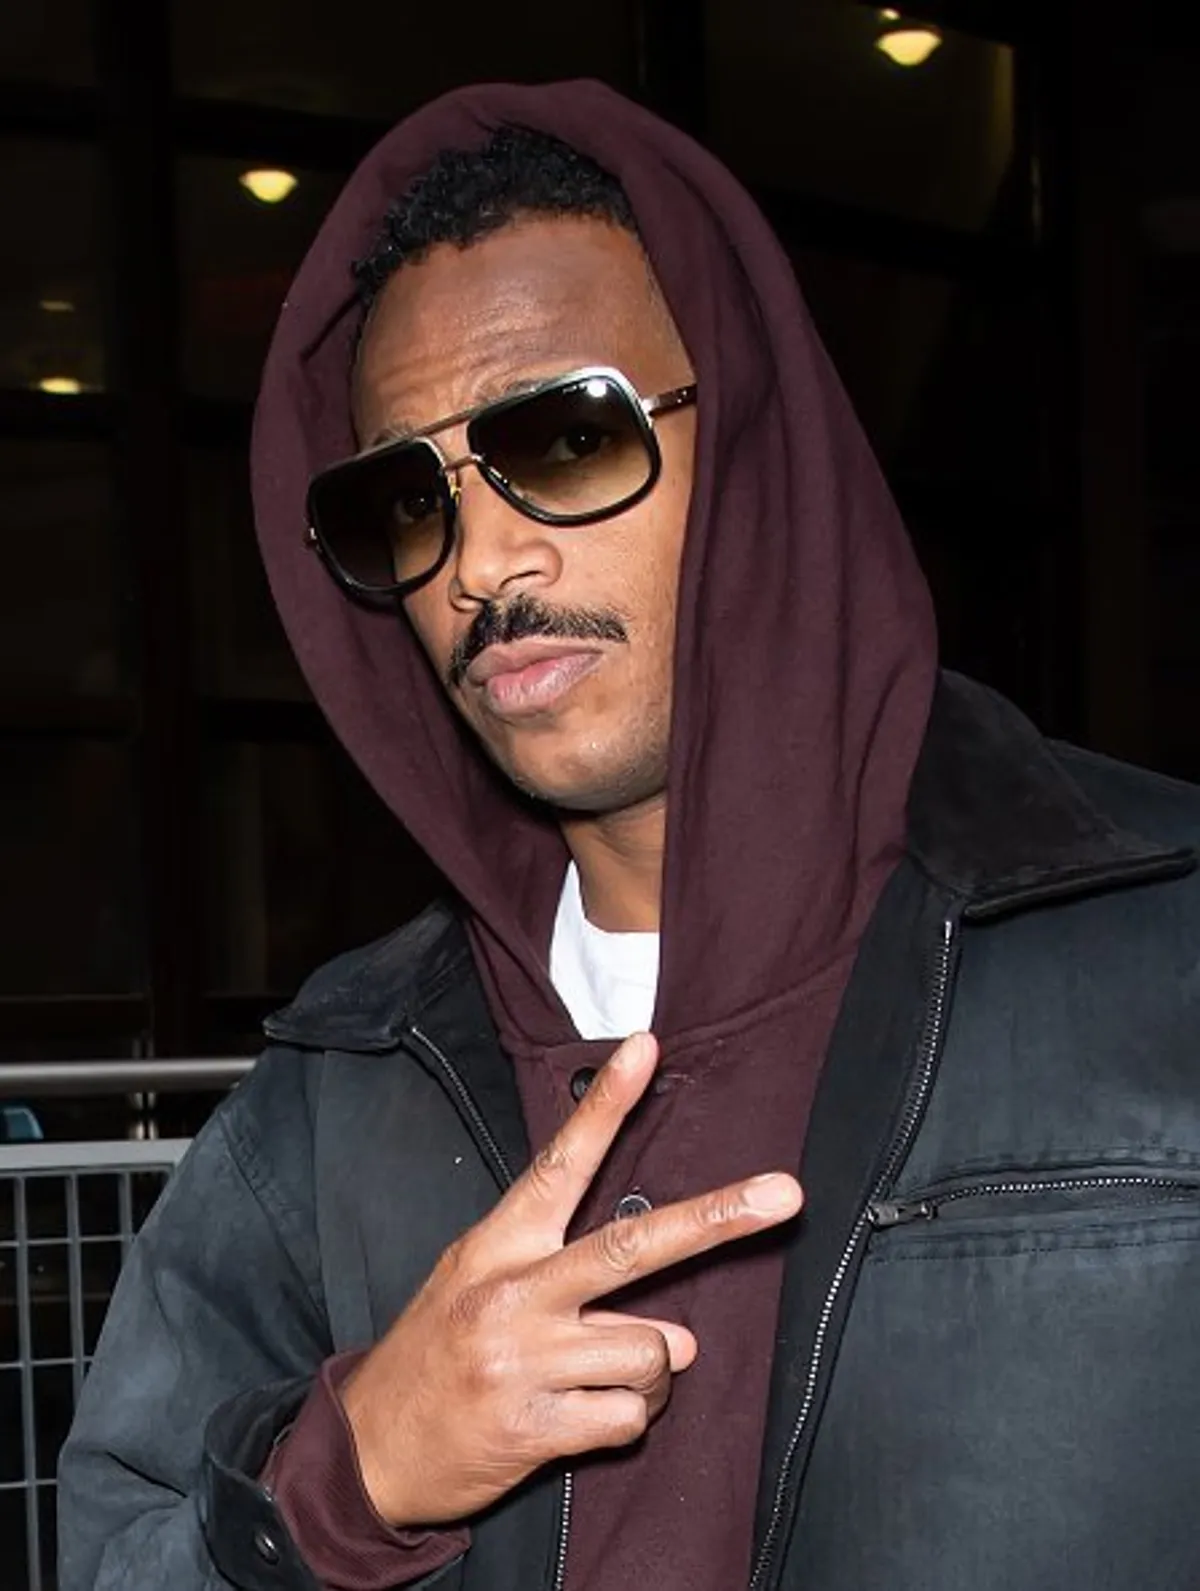 Marlon Wayans leaving Fox 29's "Good Day" on November 22, 2019. | Photo: Getty Images